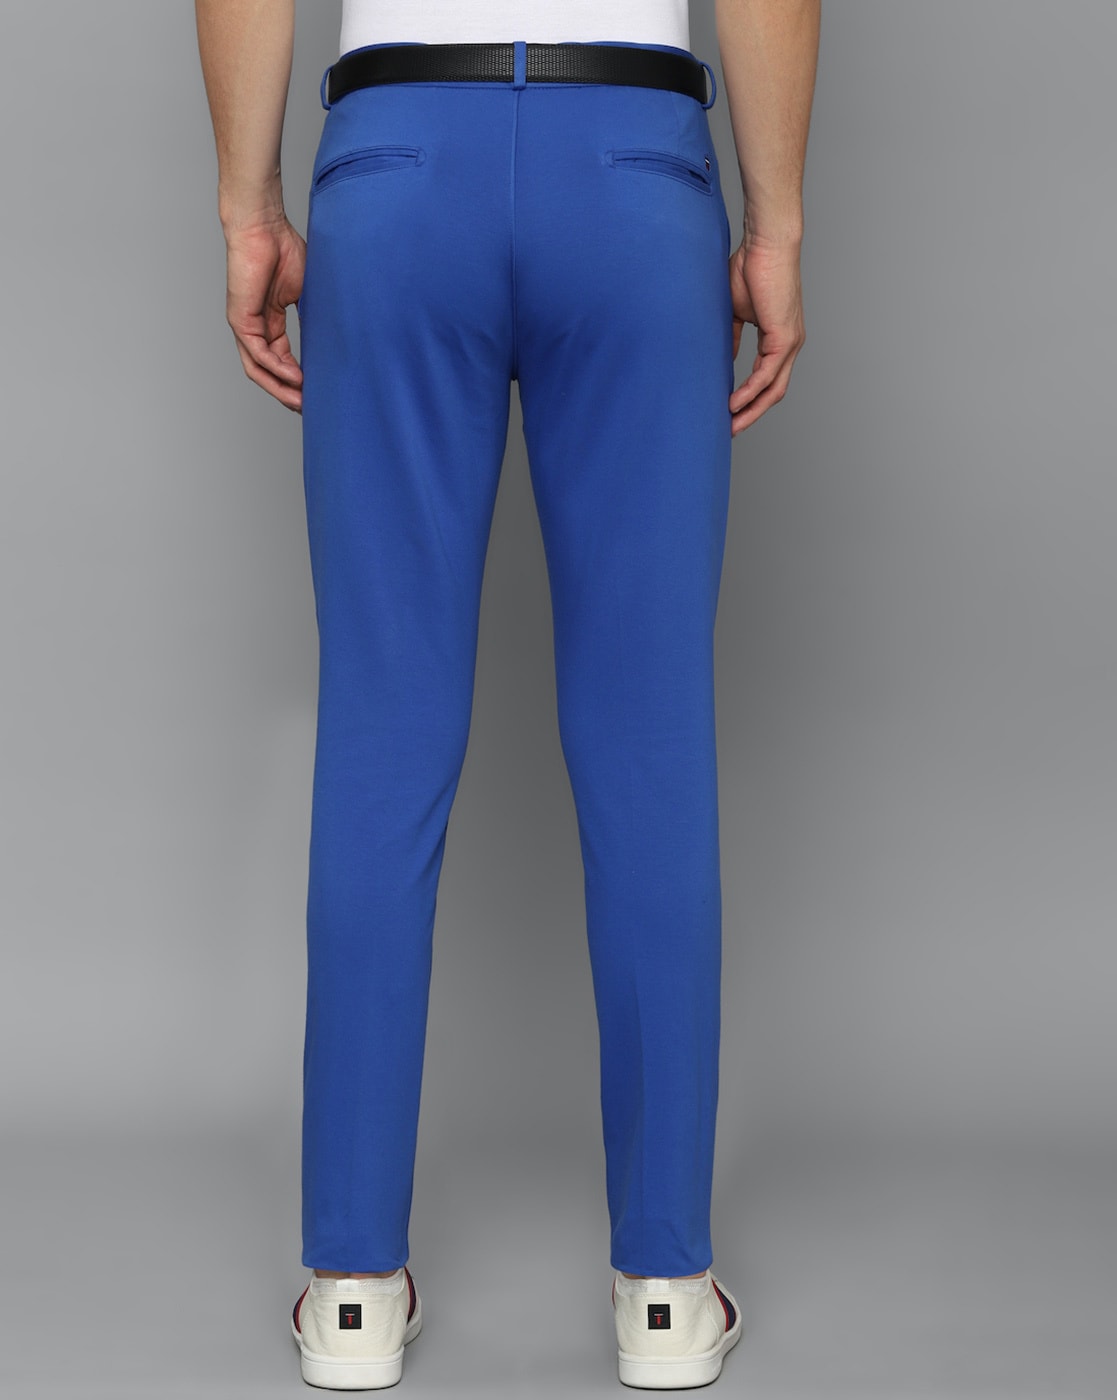 Flat Trousers Casual Wear Royal Blue Mens Cotton Trouser at Rs 450 in Delhi